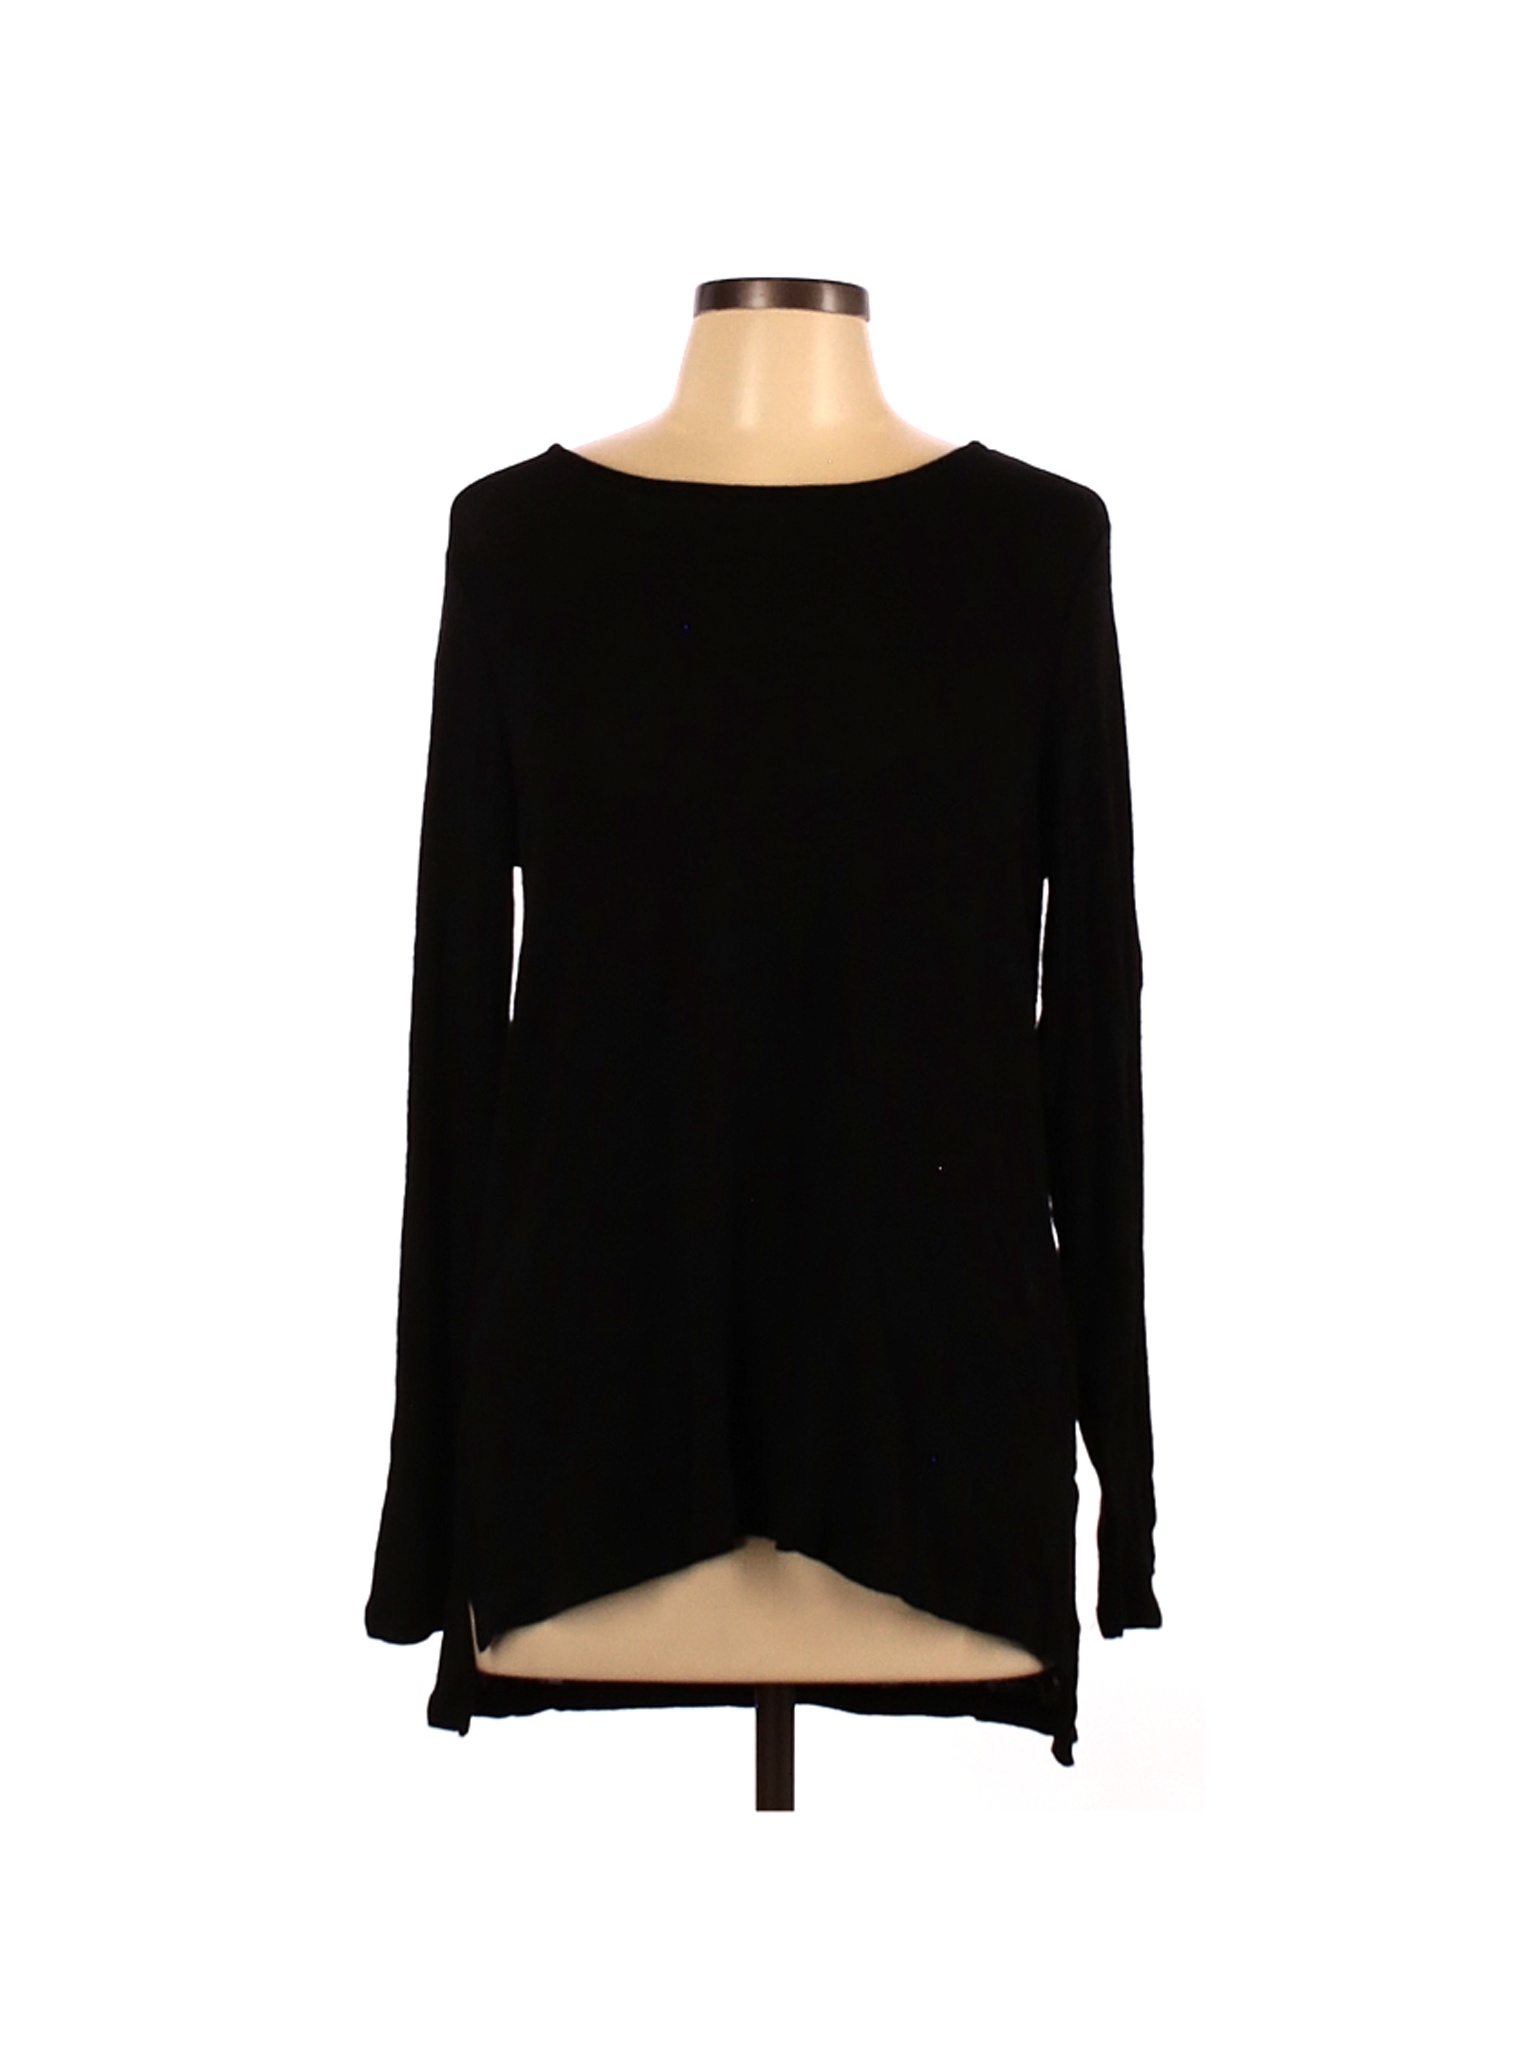 a.n.a. A New Approach Solid Black Long Sleeve Top Size L - 80% off ...